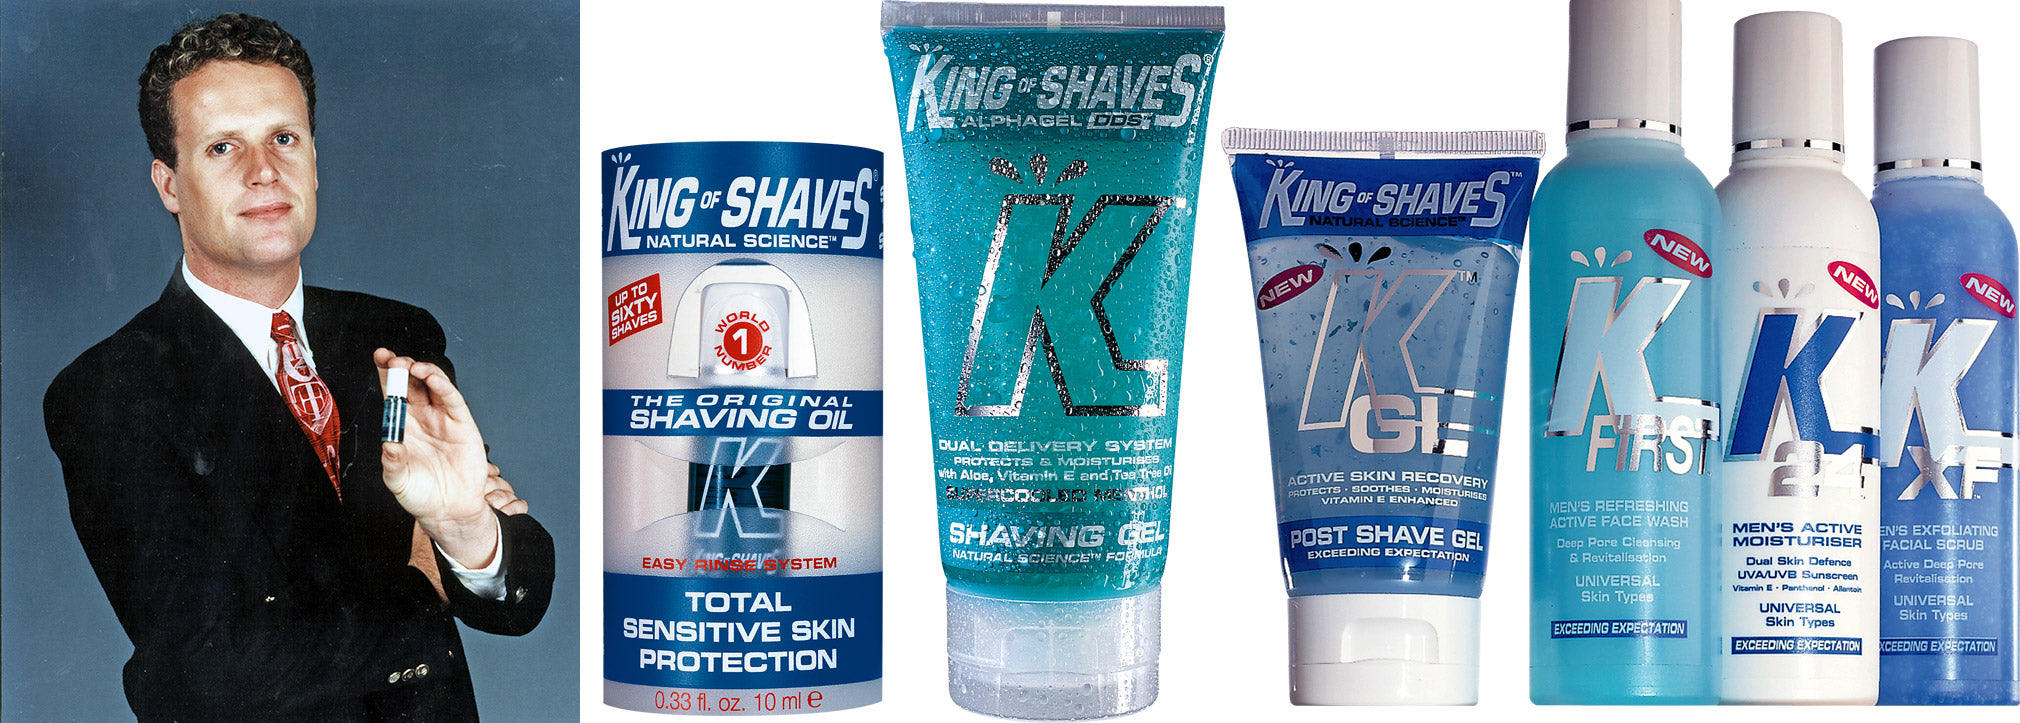 Will King and some of the original King of Shaves range of shaving and skincare products